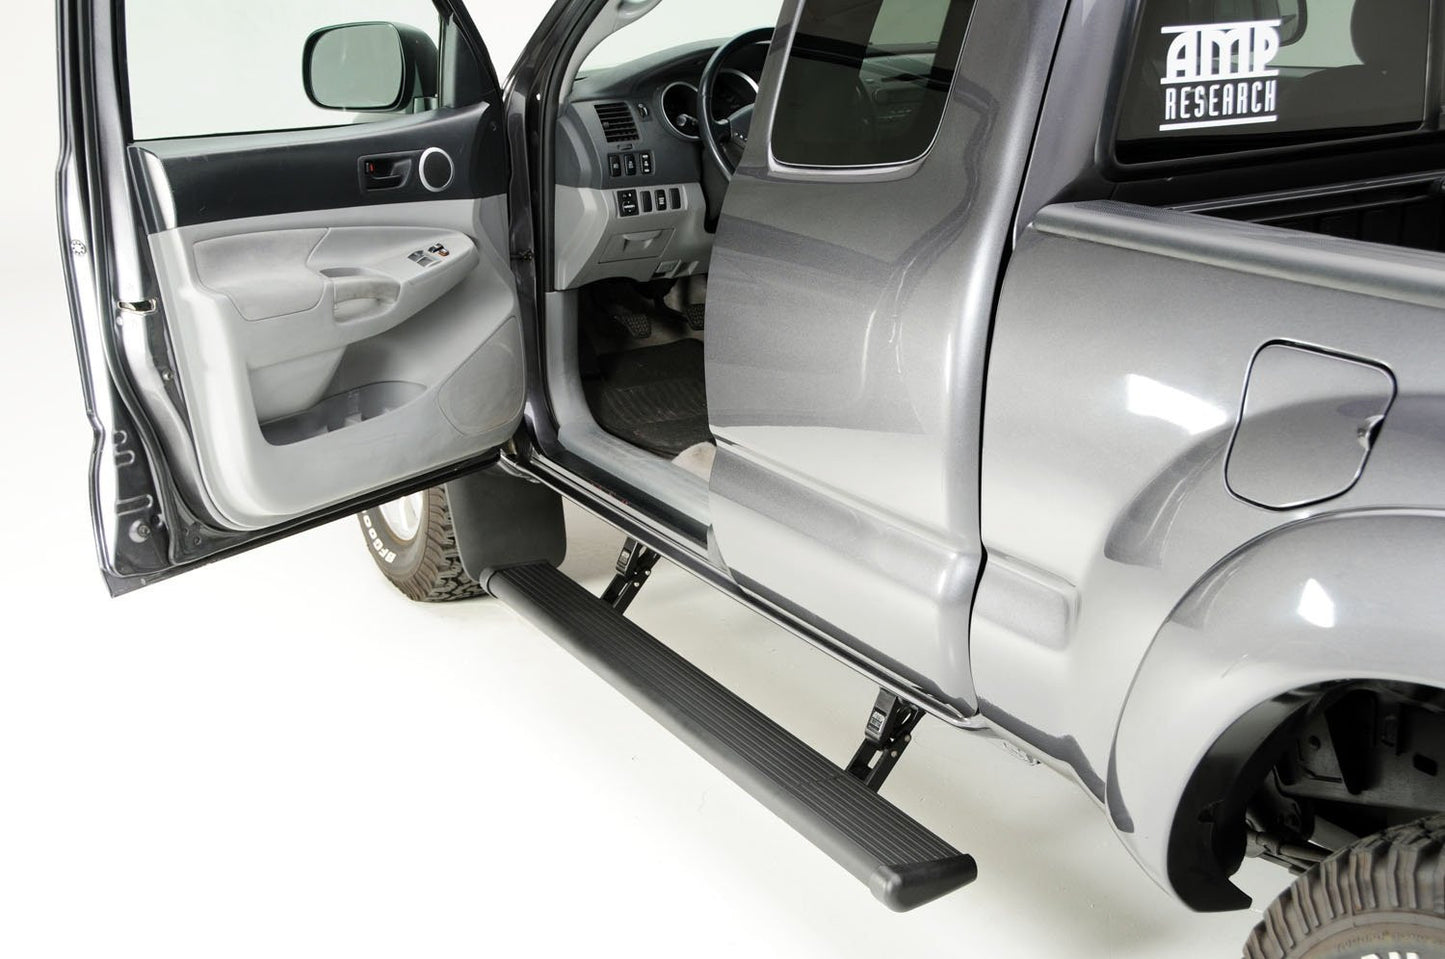 PowerStep Electric Running Board AMP-75142-01A - POWERSTEP - AMP Research - Texas Complete Truck Center